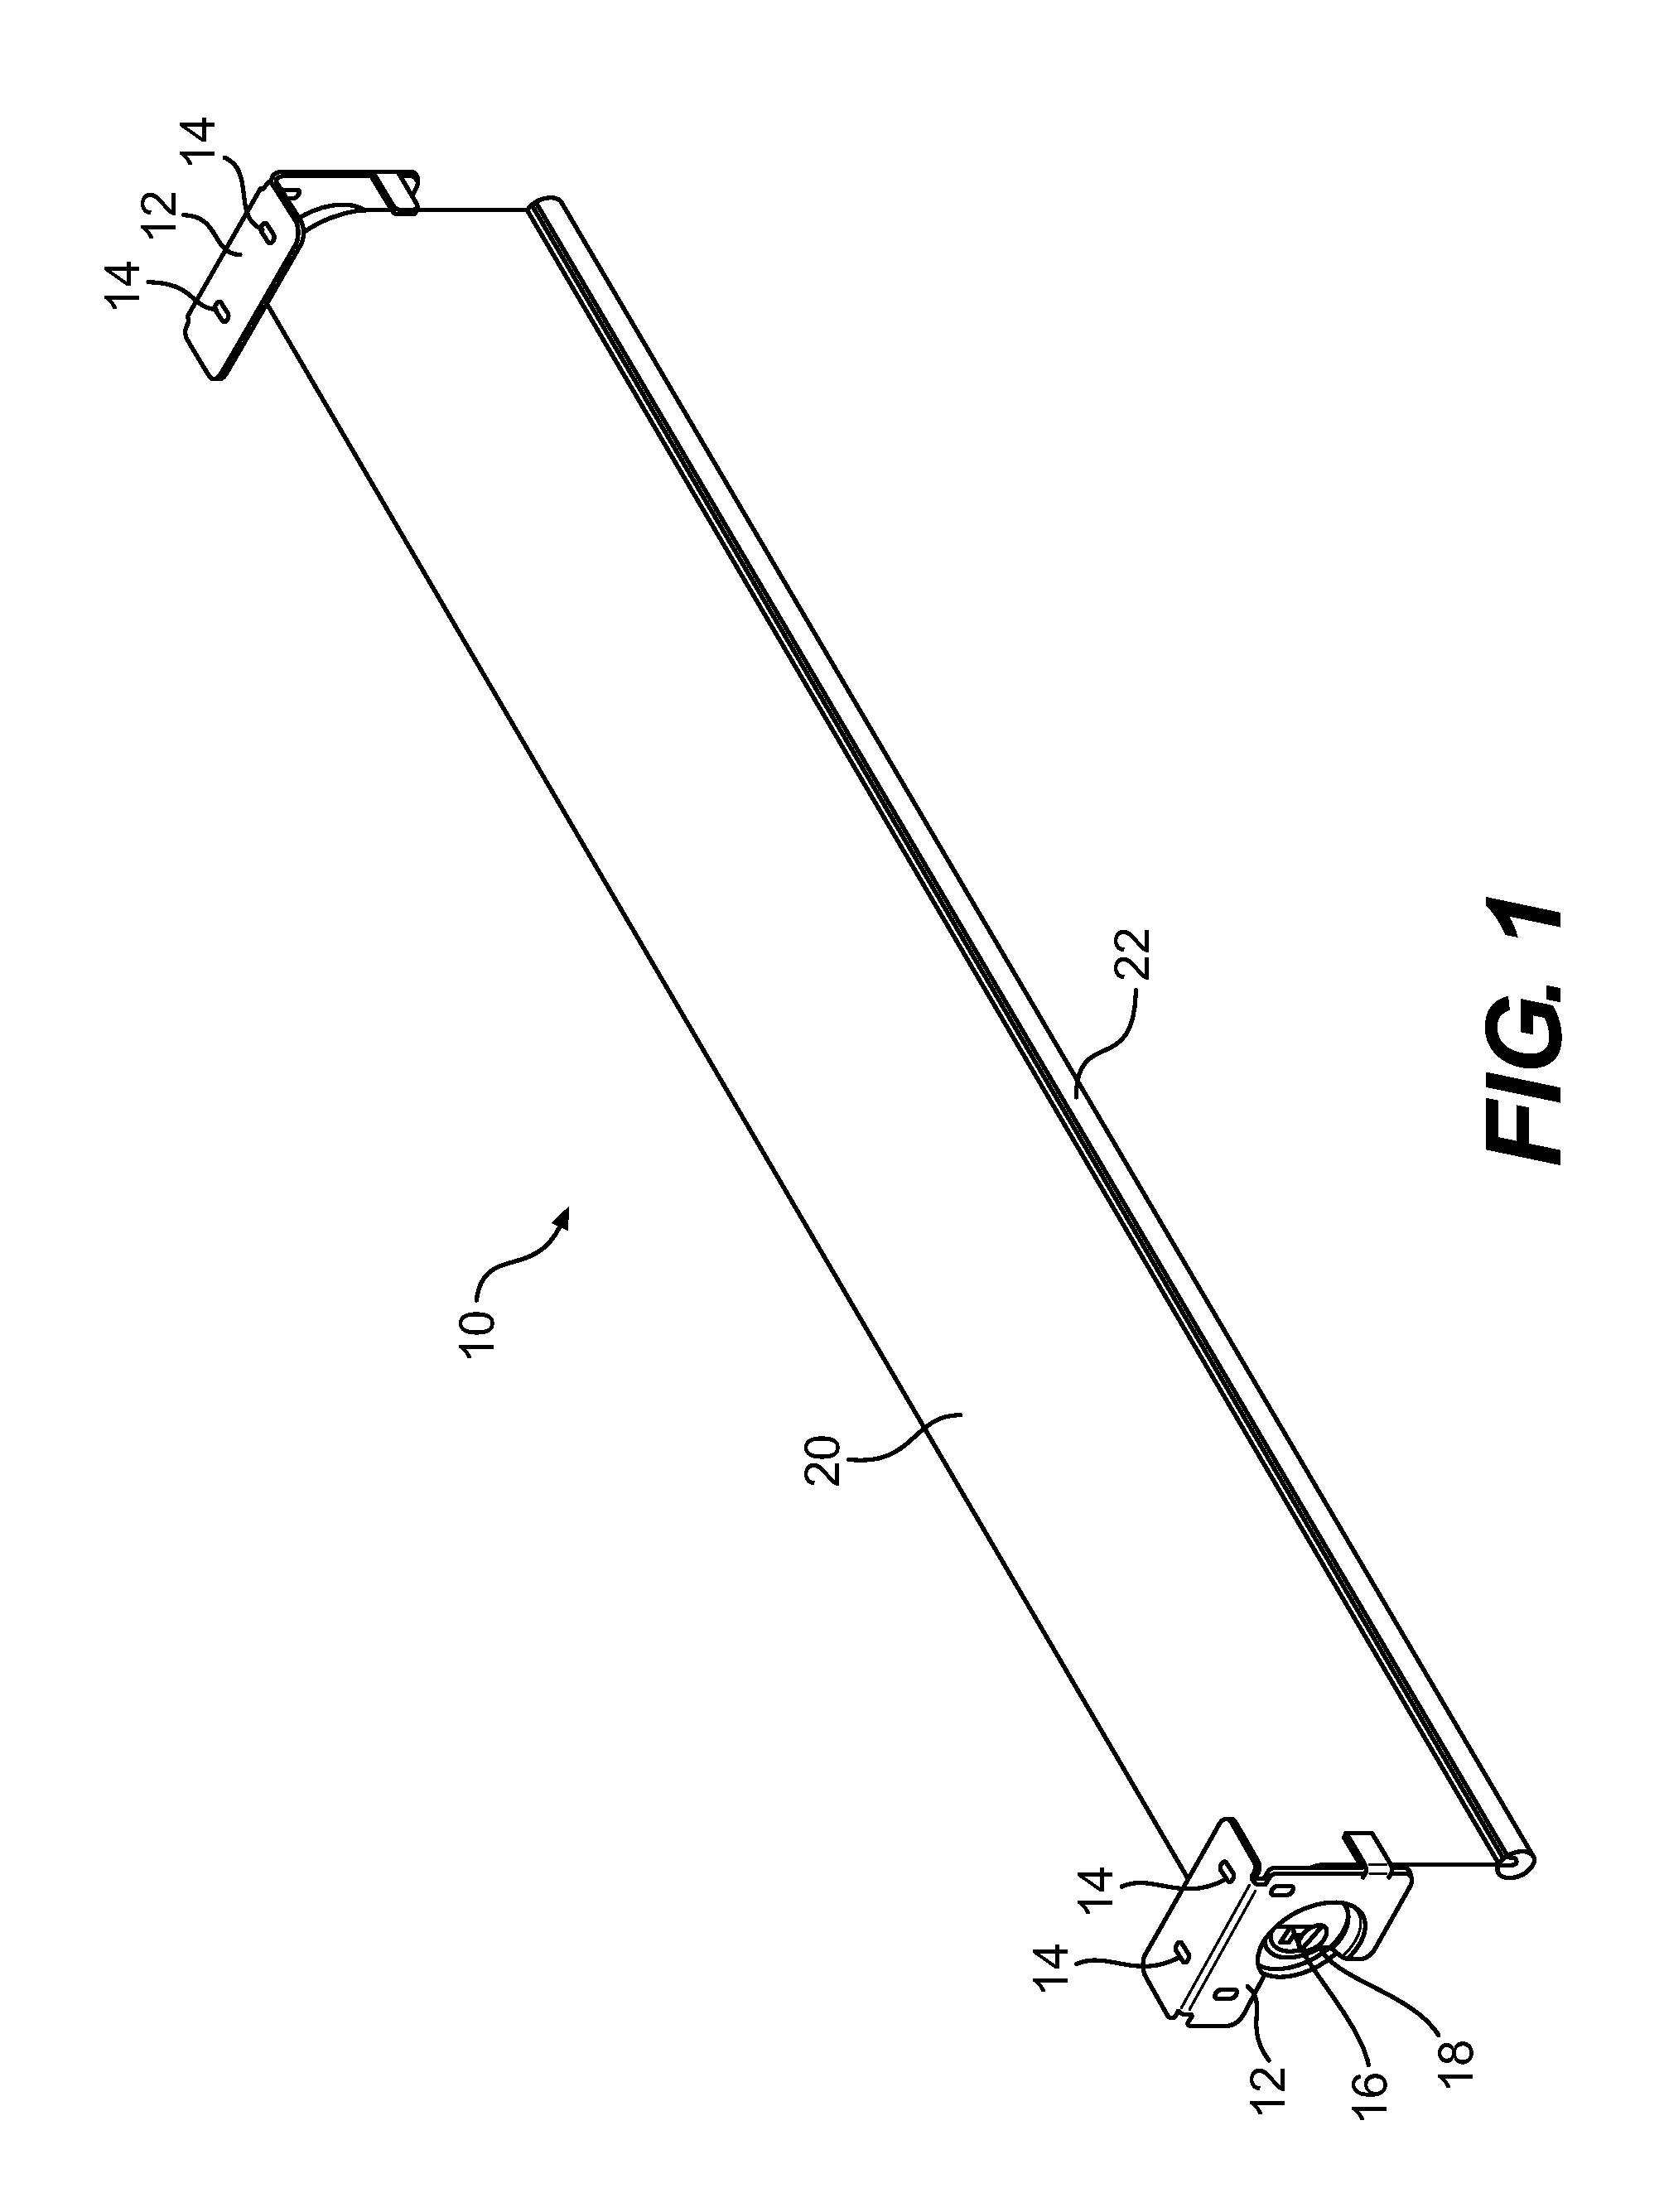 Shade with a Shear Pin and Method for Pretensioning a Shade